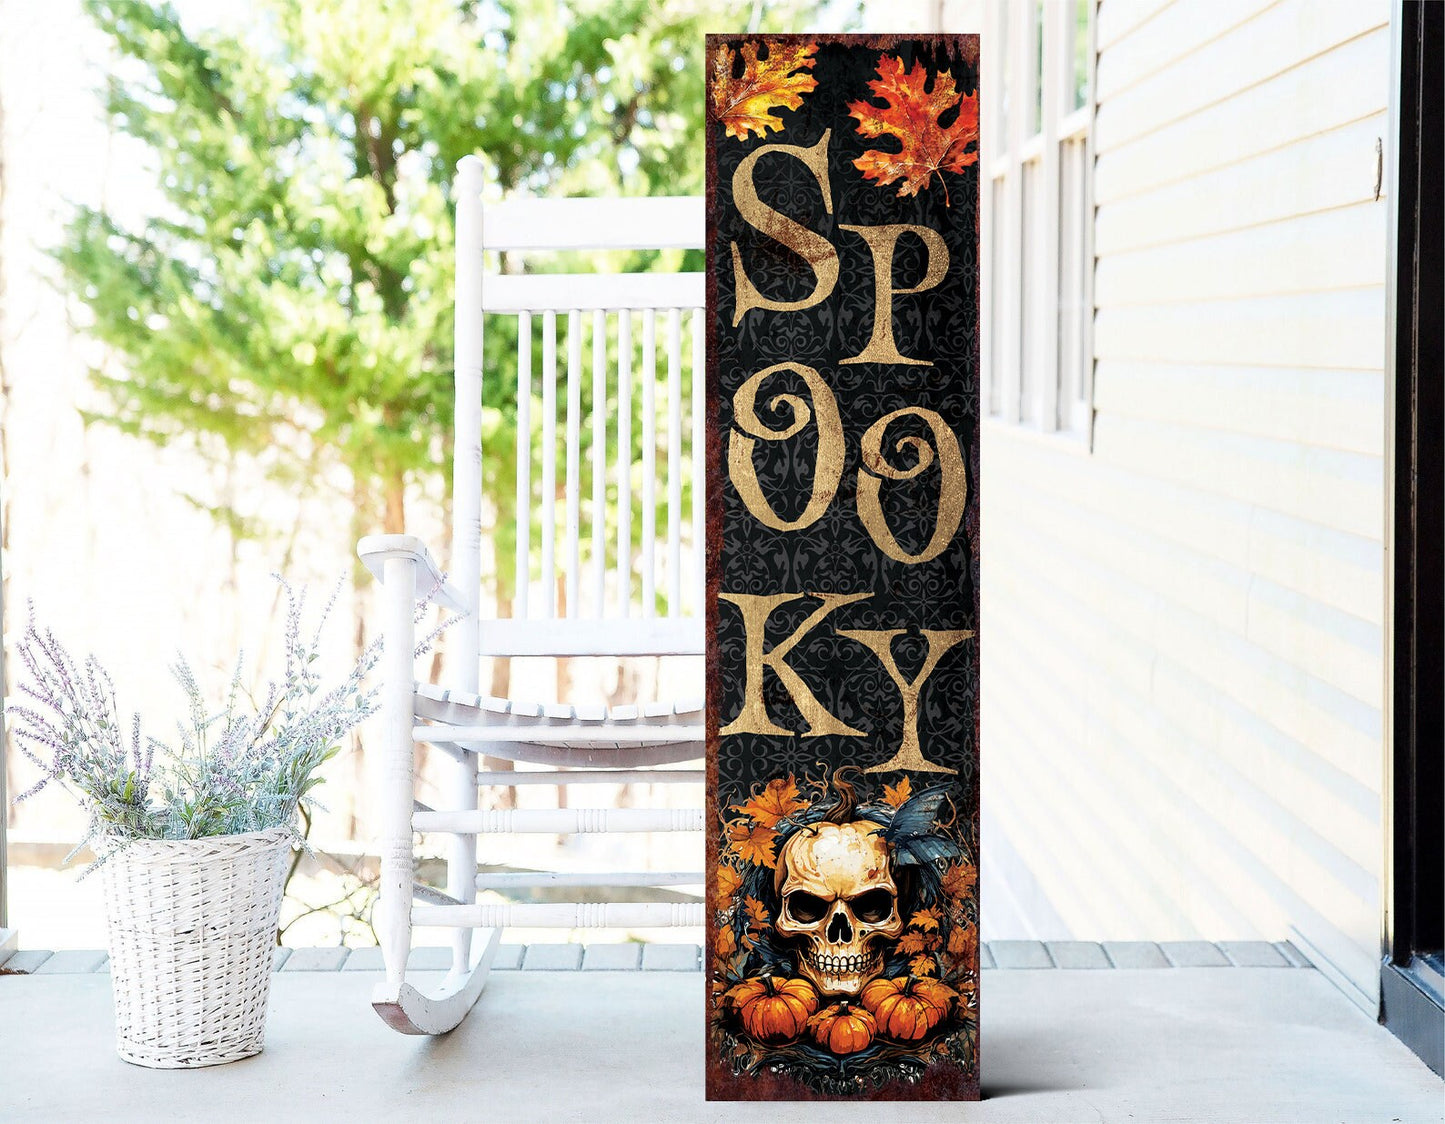 36in "Spooky" Halloween Porch Sign - Front Porch Halloween Welcome Sign, Vintage Halloween Decoration, Rustic Modern Farmhouse Entryway Board